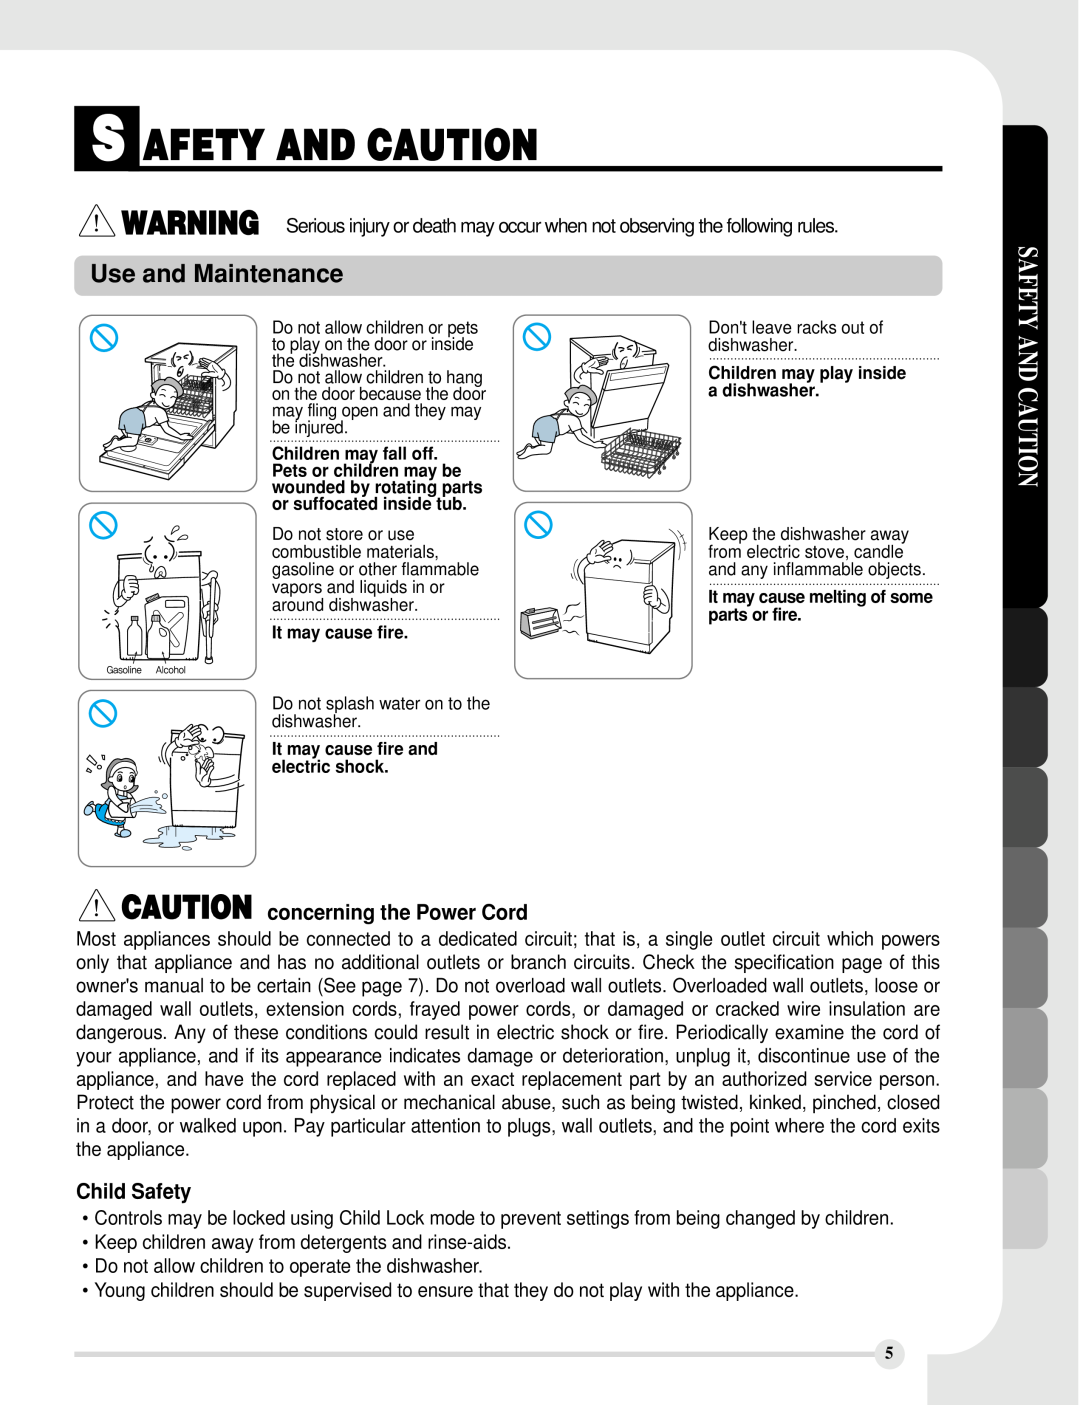 LG Electronics LDS5811BB manual Use and Maintenance, CAUTION concerning the Power Cord, Child Safety, S Afety And Caution 